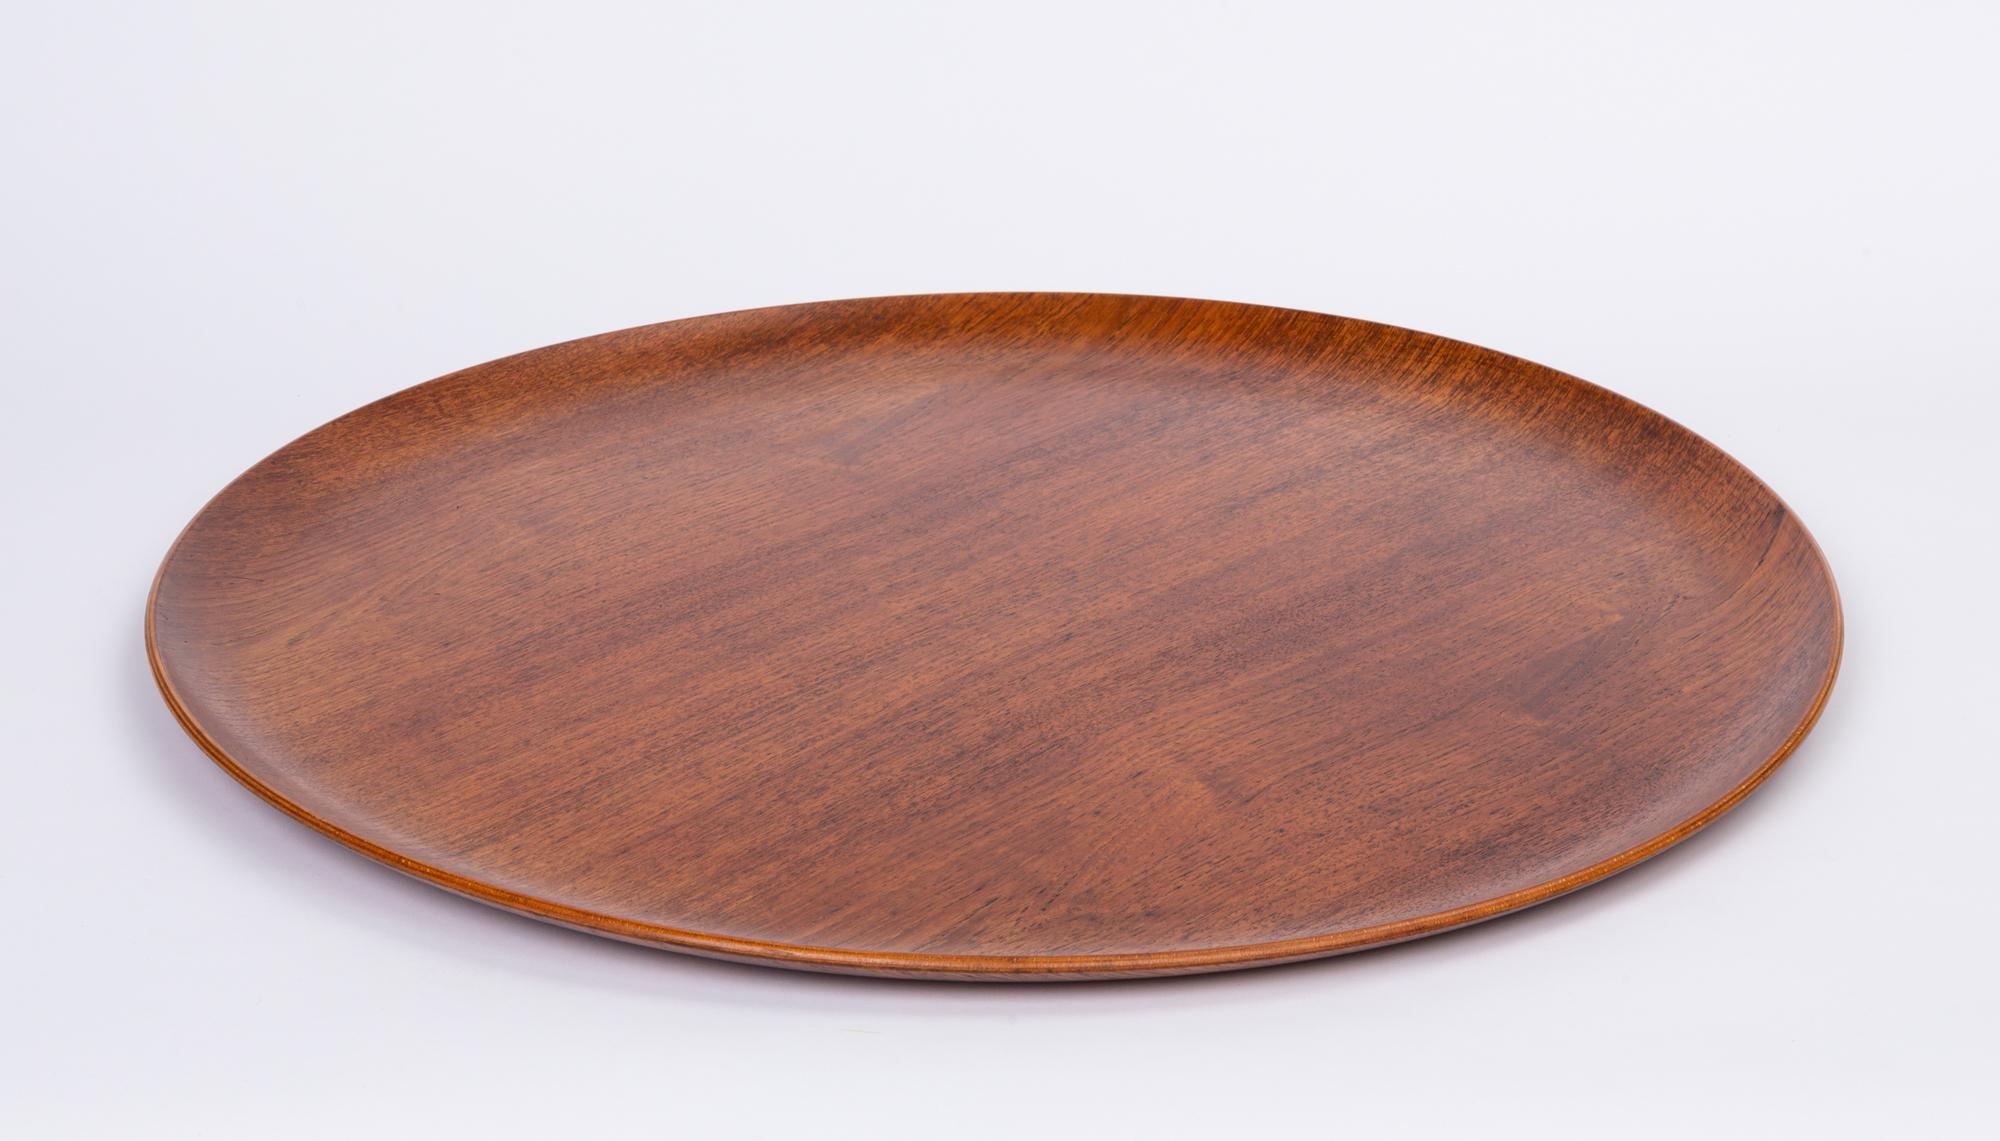 Round teak serving tray in the style of Jens Quistgaard. The tray features curved raised edges and beautiful grain that is more apparent with the hand applied oil finish. Marked on underside [Danish Furniture Makers Control]

Dimensions: 23.5”